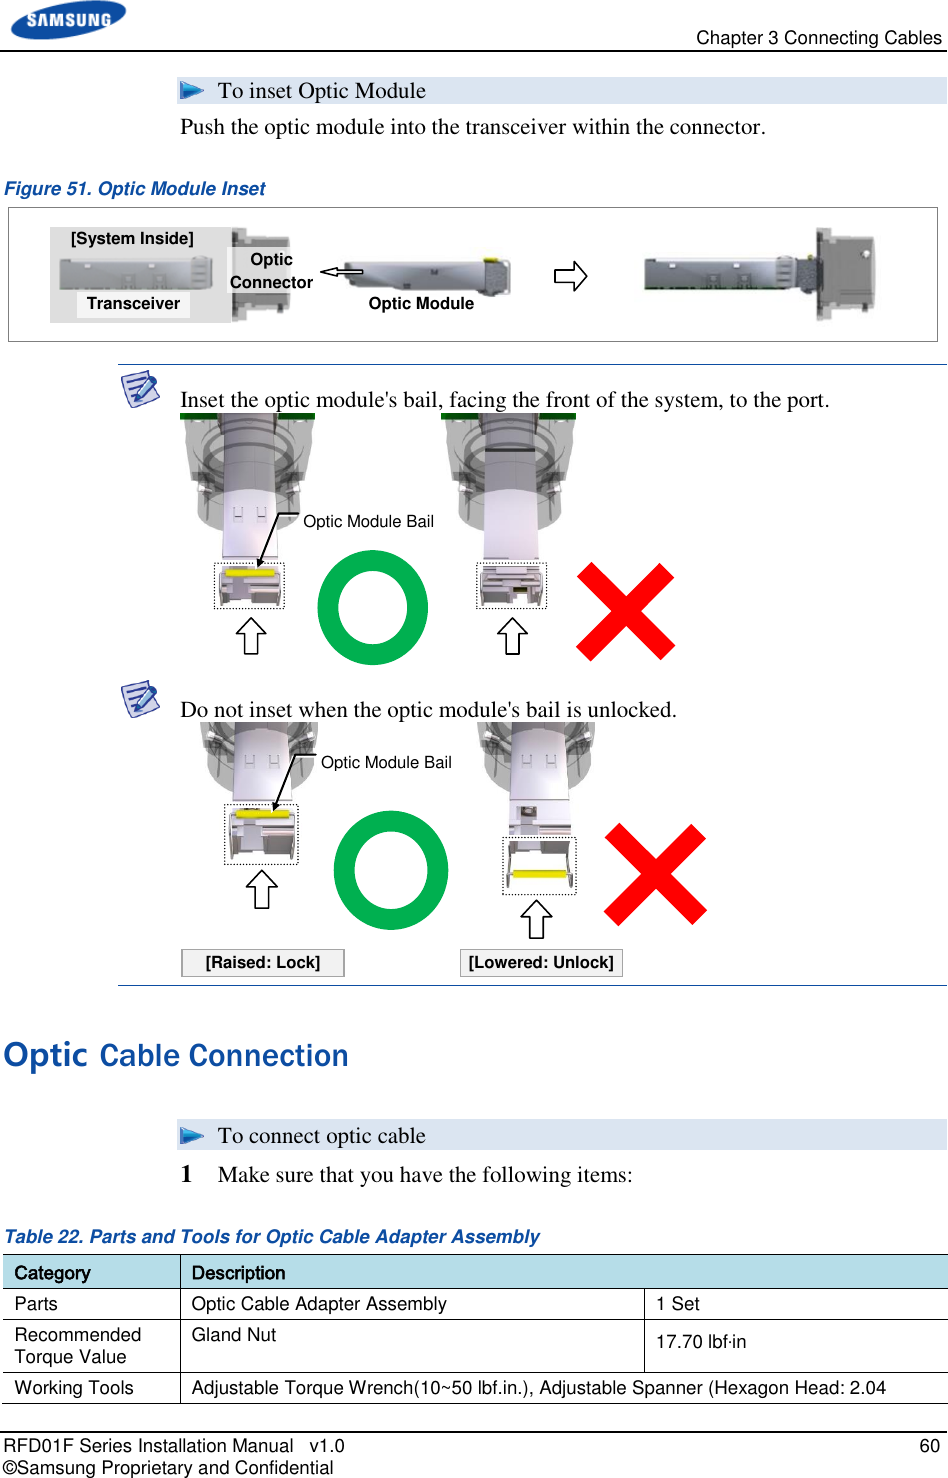   Chapter 3 Connecting Cables RFD01F Series Installation Manual   v1.0   60 © Samsung Proprietary and Confidential  To inset Optic Module Push the optic module into the transceiver within the connector. Figure 51. Optic Module Inset   Inset the optic module&apos;s bail, facing the front of the system, to the port.   Do not inset when the optic module&apos;s bail is unlocked.  Optic Cable Connection  To connect optic cable 1  Make sure that you have the following items: Table 22. Parts and Tools for Optic Cable Adapter Assembly Category Description Parts Optic Cable Adapter Assembly 1 Set Recommended Torque Value Gland Nut 17.70 lbf·in Working Tools Adjustable Torque Wrench(10~50 lbf.in.), Adjustable Spanner (Hexagon Head: 2.04 Optic Module Bail [Raised: Lock] [Lowered: Unlock] Optic Module Bail [System Inside] Transceiver Optic Module Optic Connector 